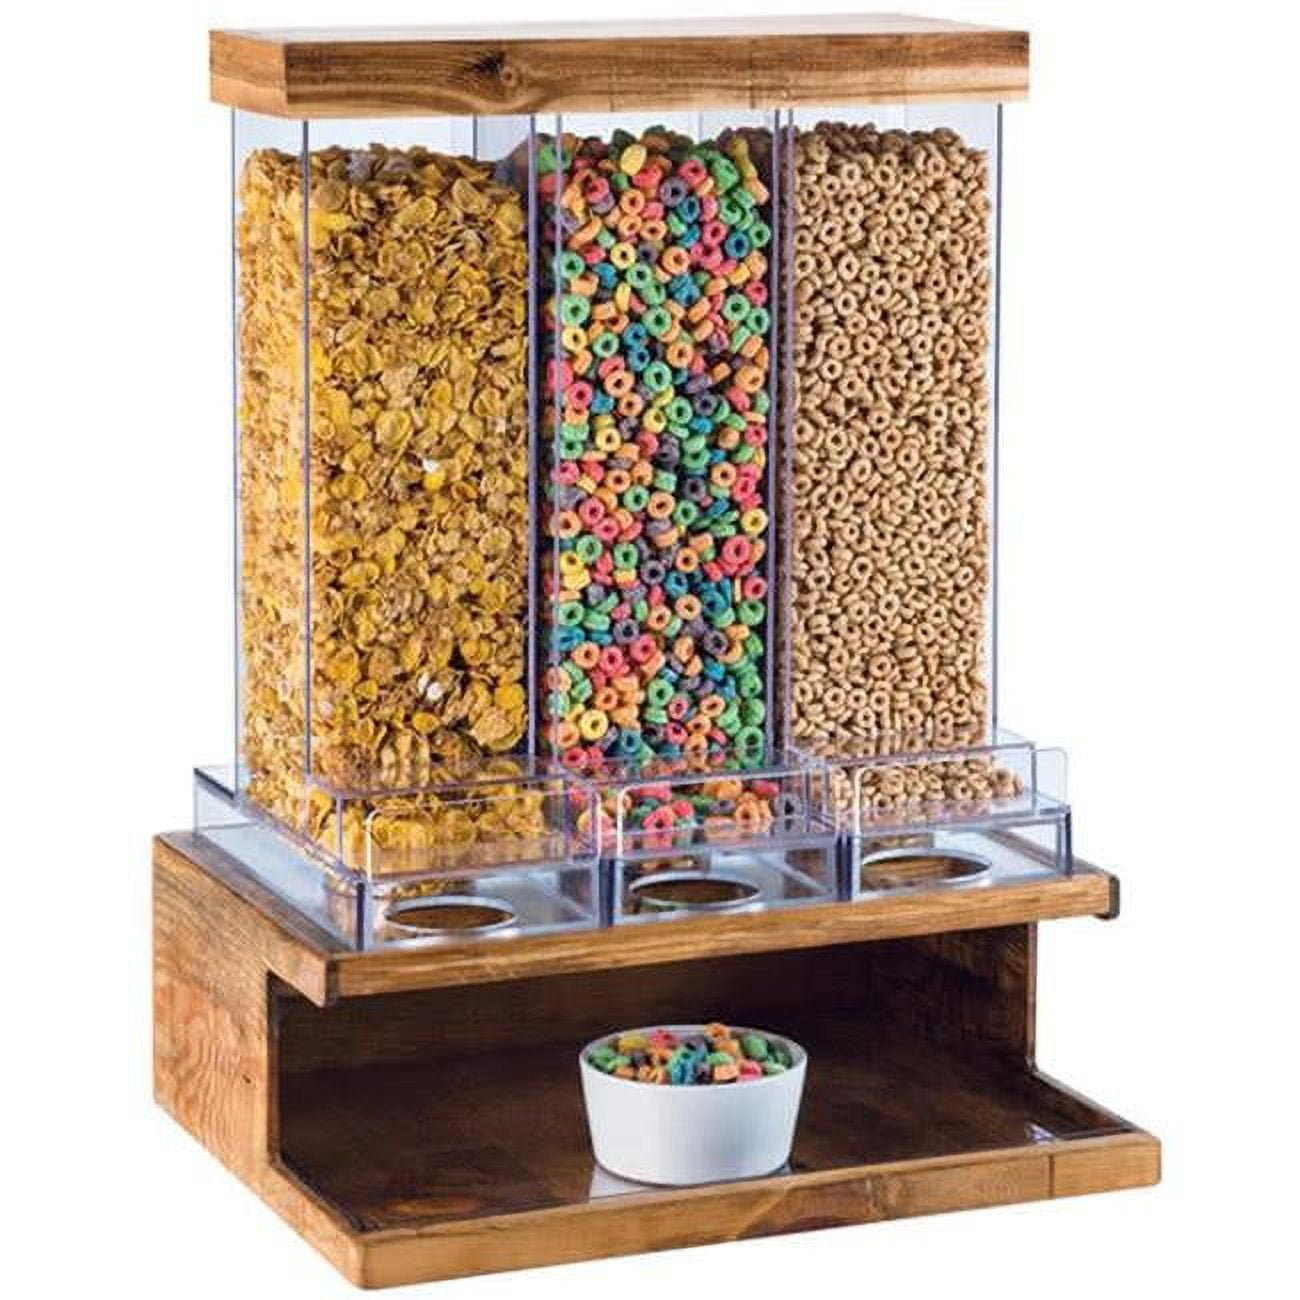 3434-99 Madera Cereal Dispenser 3-section - Brown